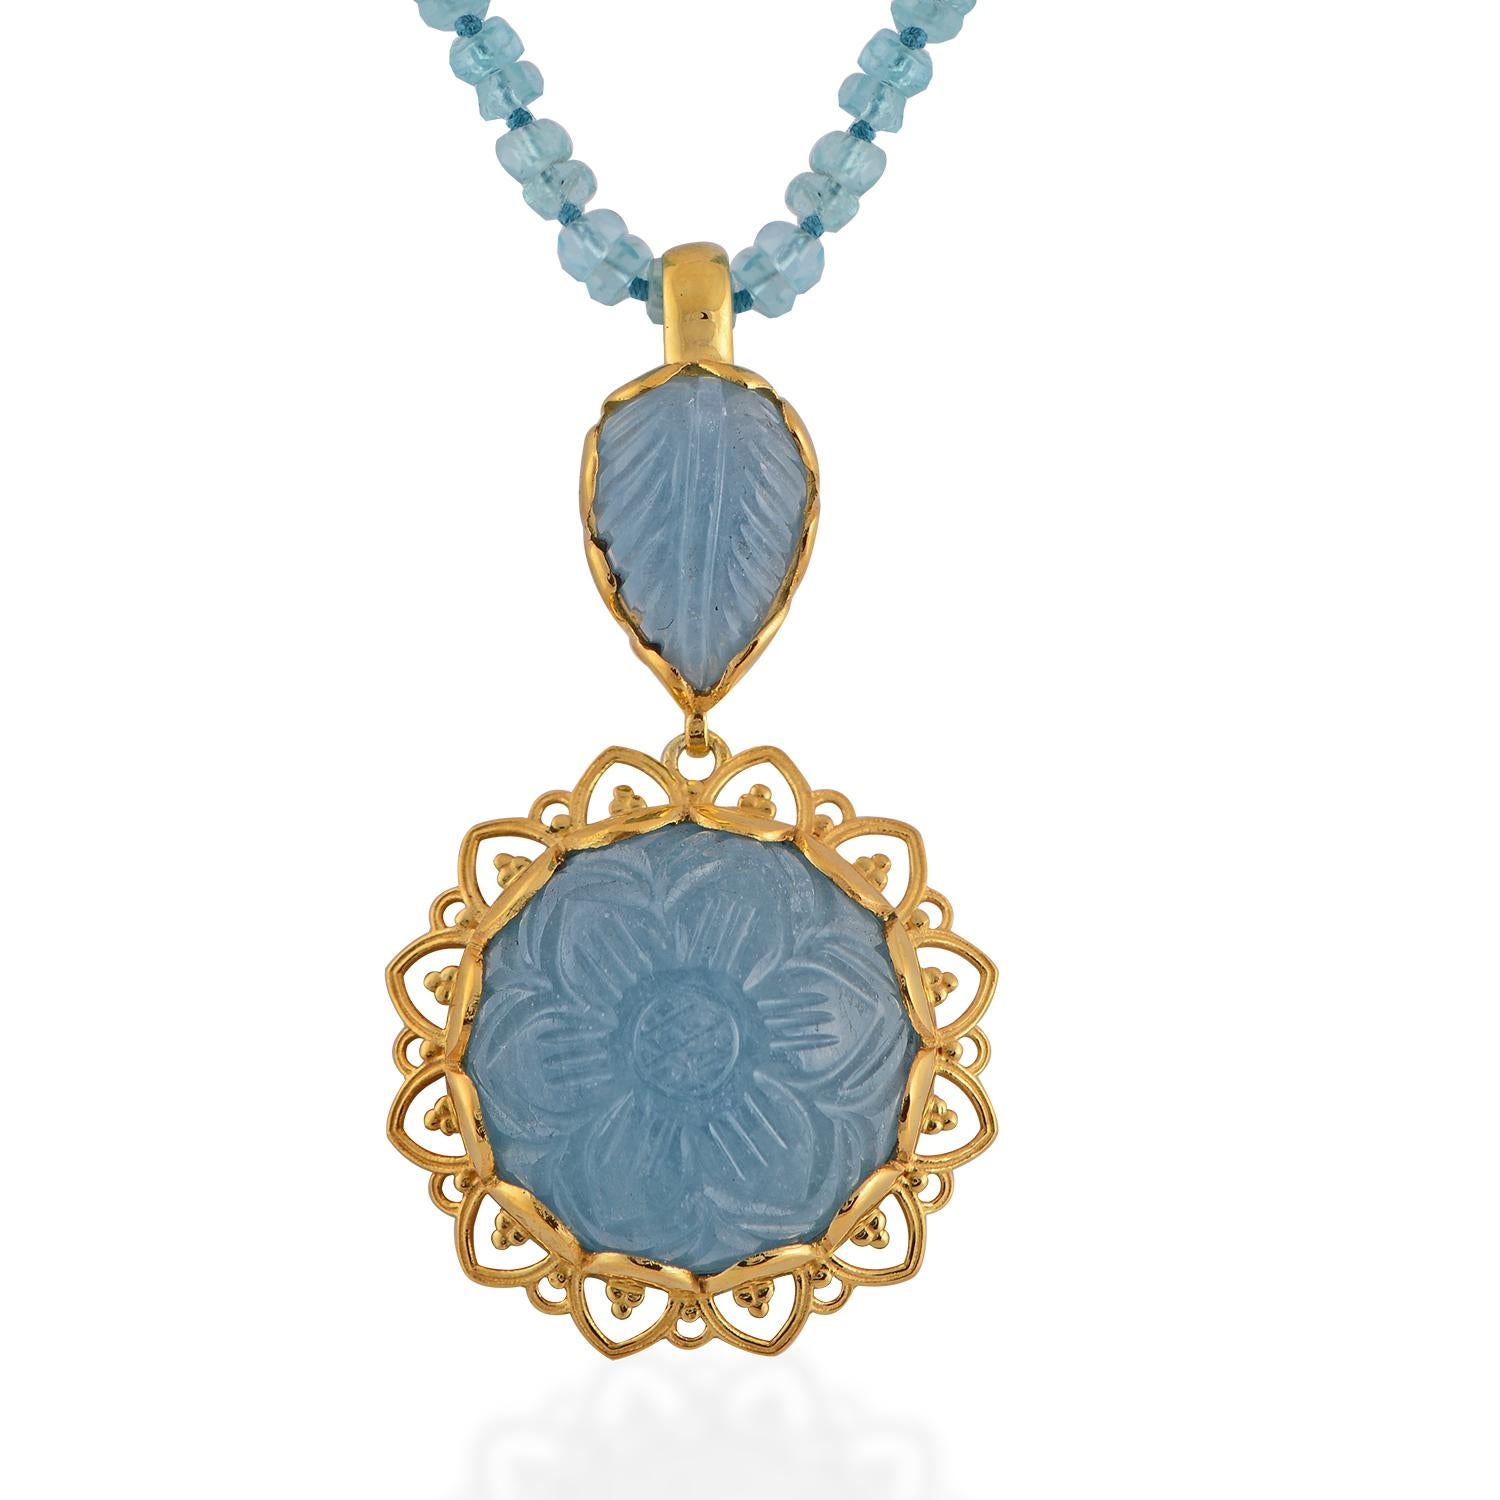 

This beautiful one of a kind pendant has been handmade in our workshops. We have used jaali and embossed work in this pendant and embedded it with hand carved aquamarines. The pendant is made in sterling silver with 24ct gold vermeil and comes